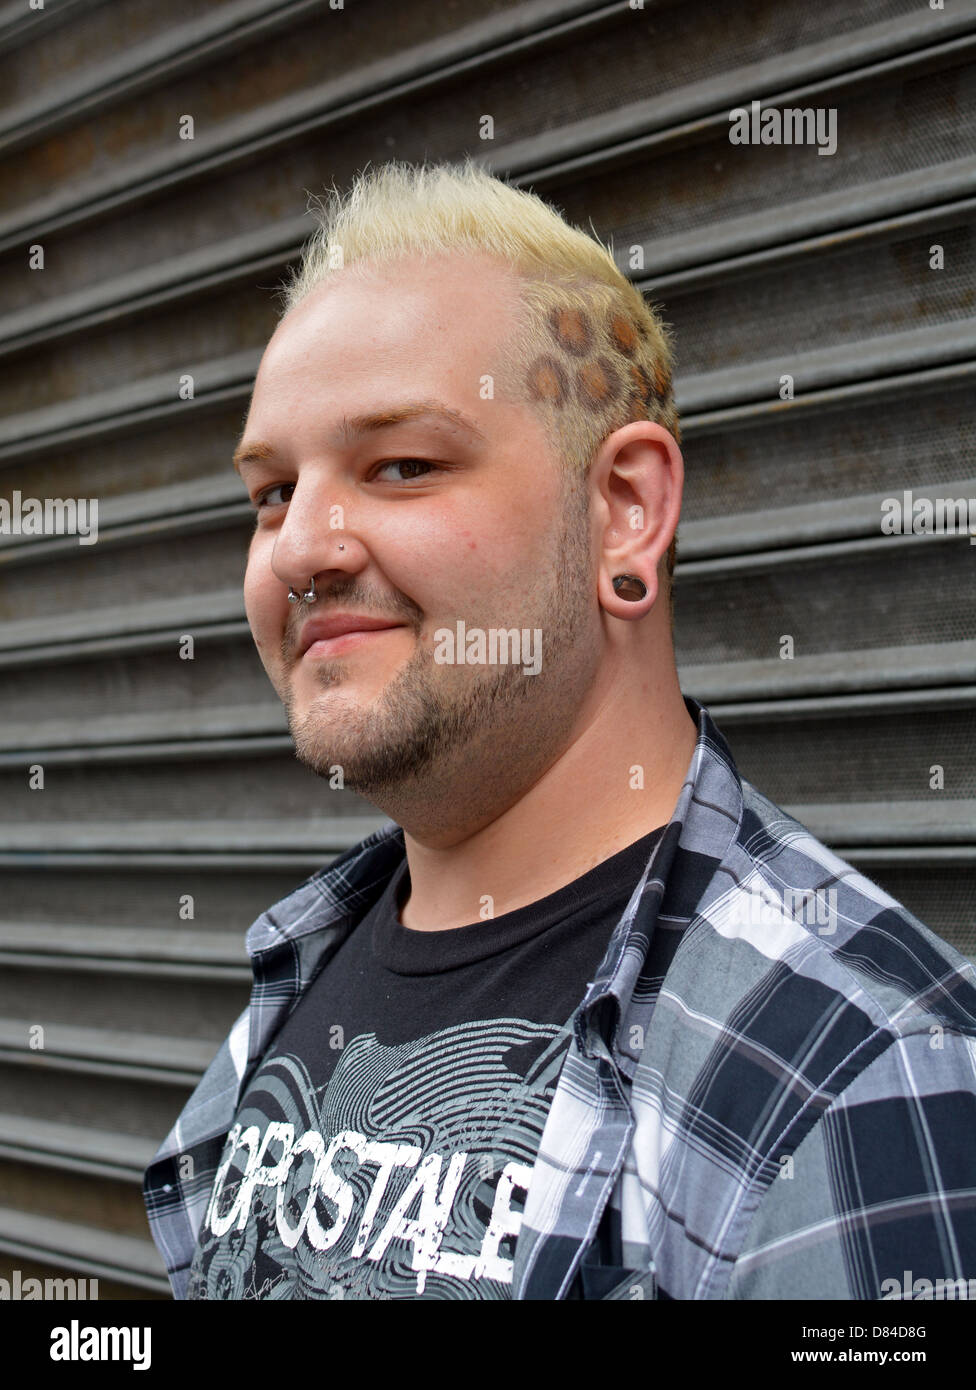 Man with mohawk hairdo and leopard coloring in his hair in Midtown Manhattan Stock Photo